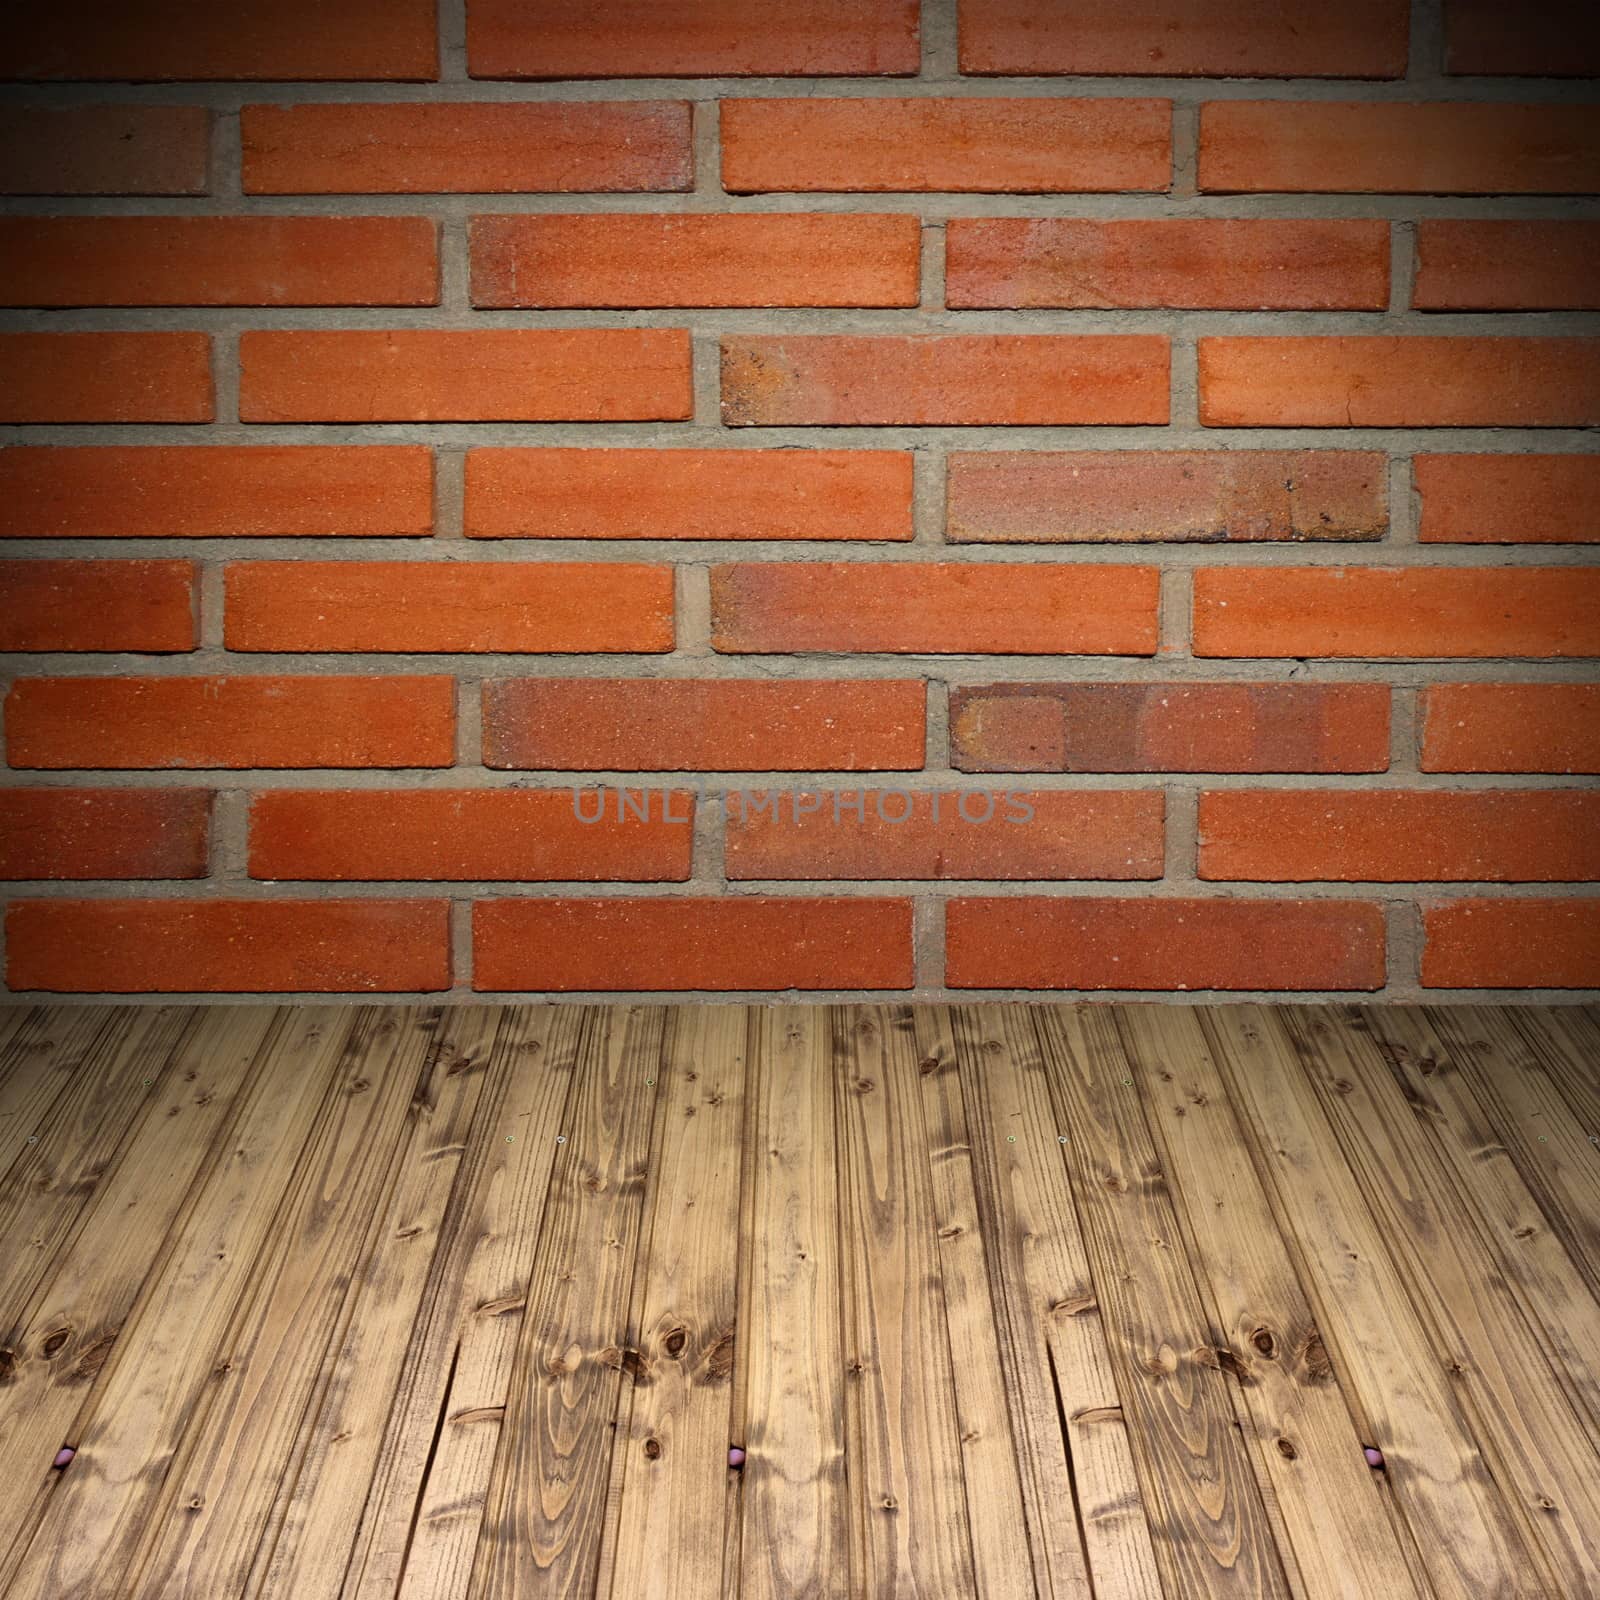 old brick wall and wooden floor by taviphoto